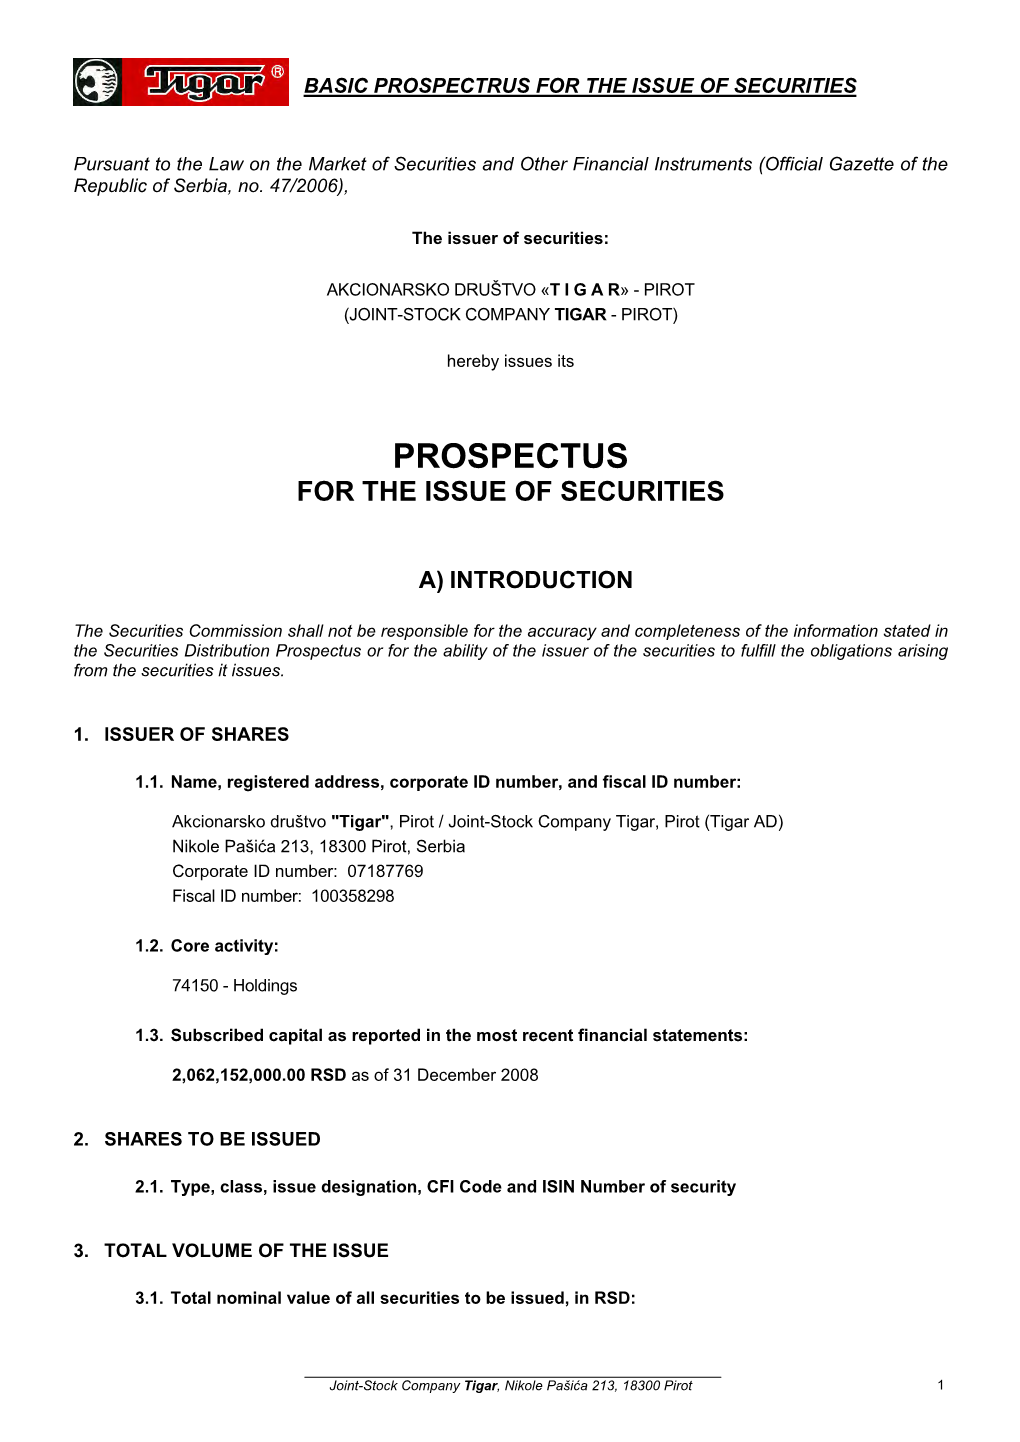 Prospectus for the Issue of Securities